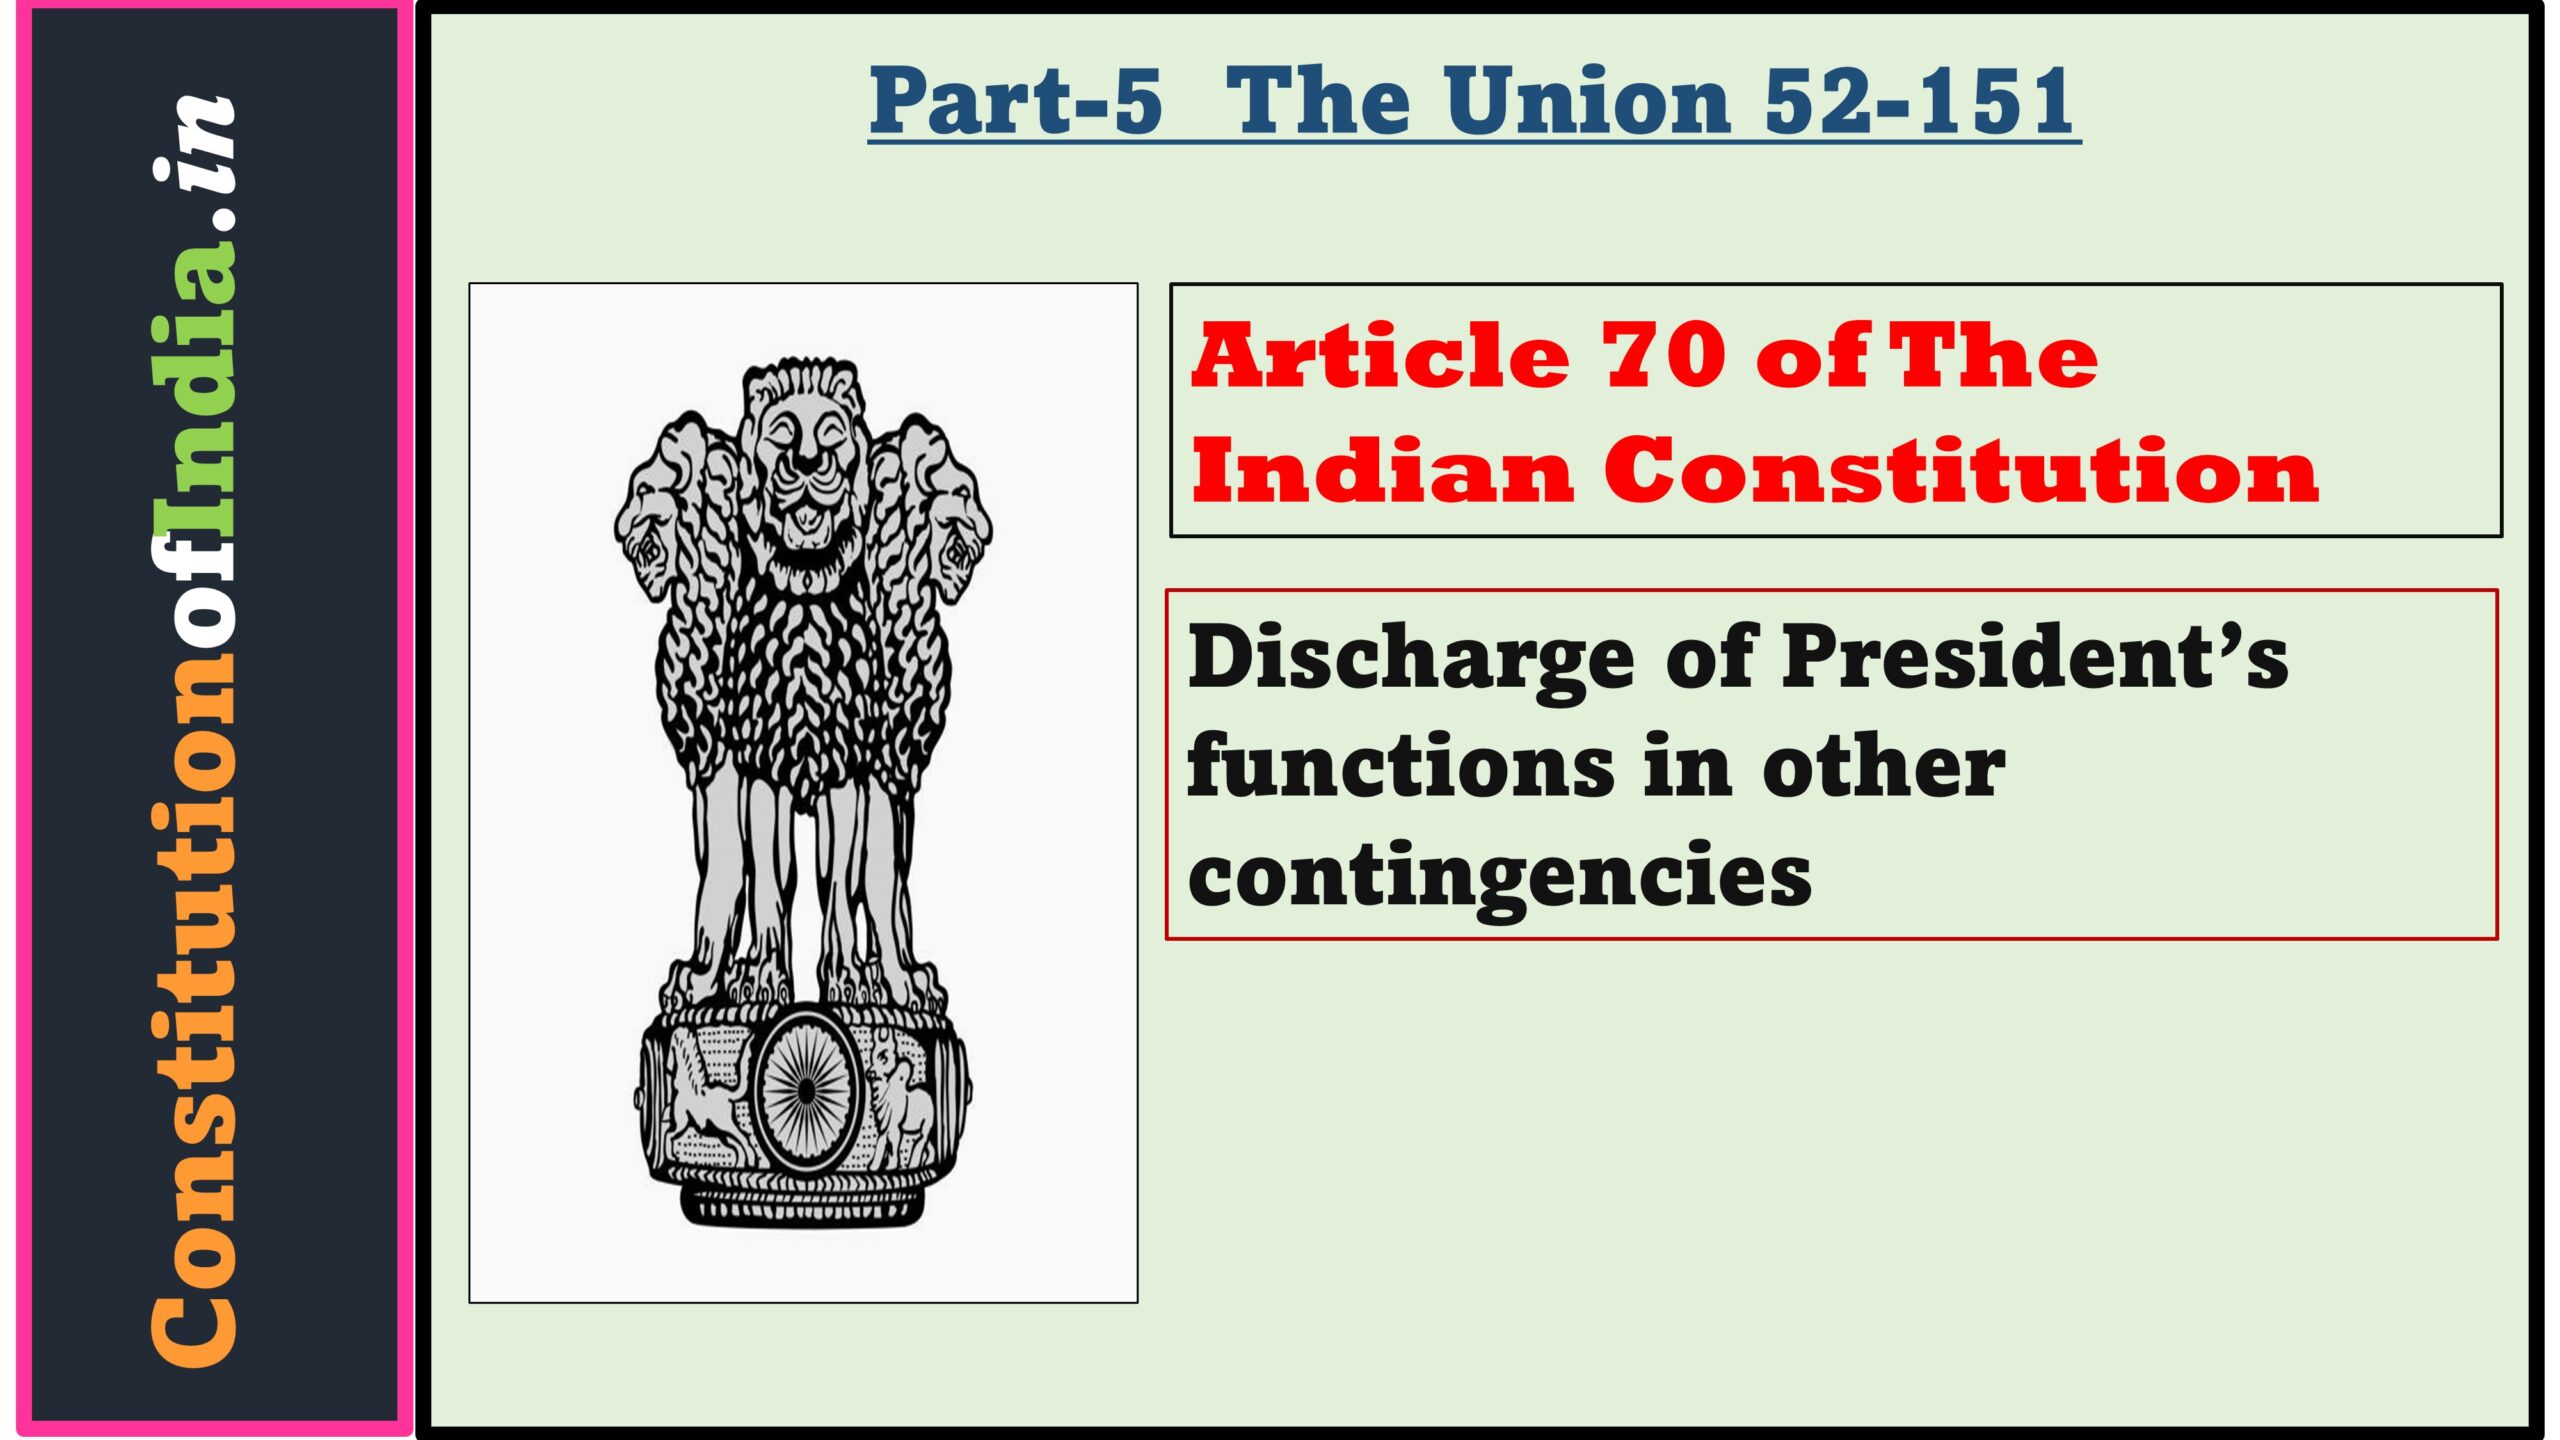 Article 70 of Indian Constitution